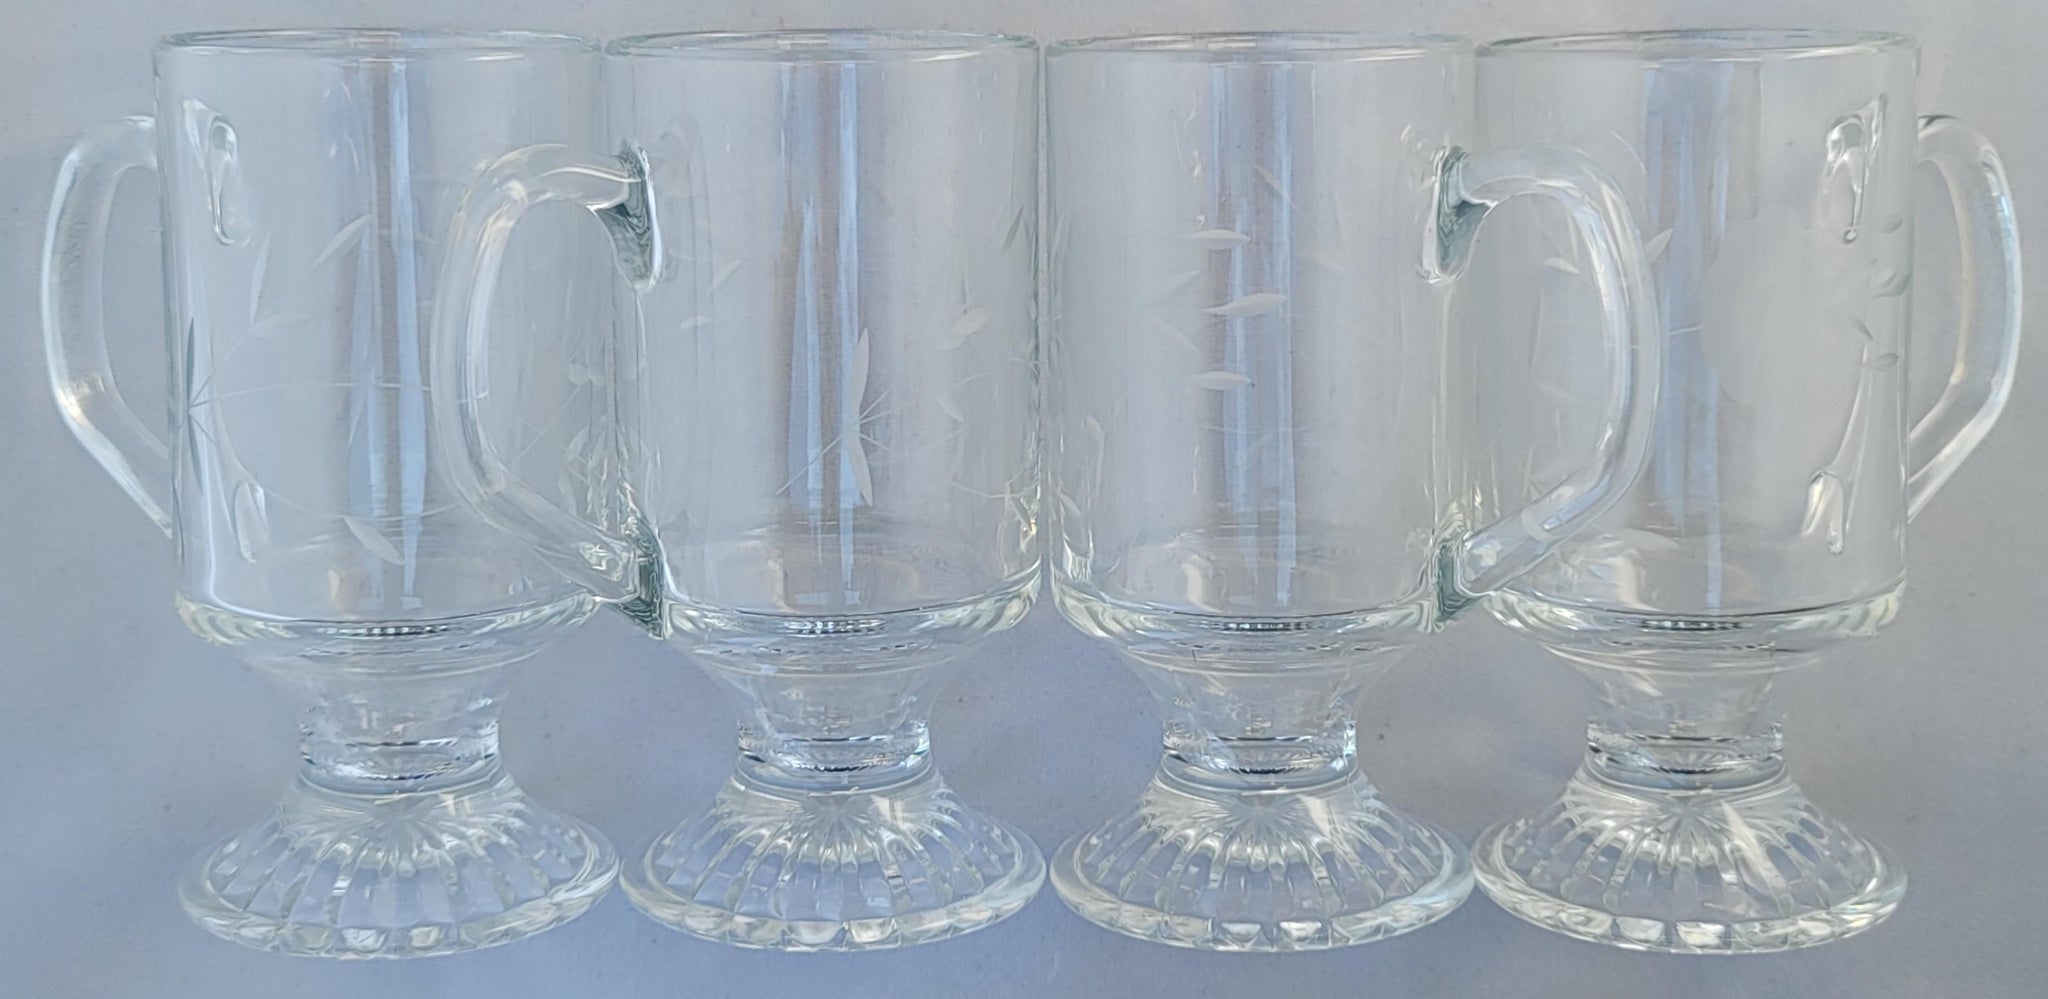 https://eclecticcollective.com/cdn/shop/products/vintage-1960s-princess-house-footed-clear-pressed-cut-glass-mugs-latte-glasses-set-of-4-1183_1024x1024@2x.jpg?v=1616126260